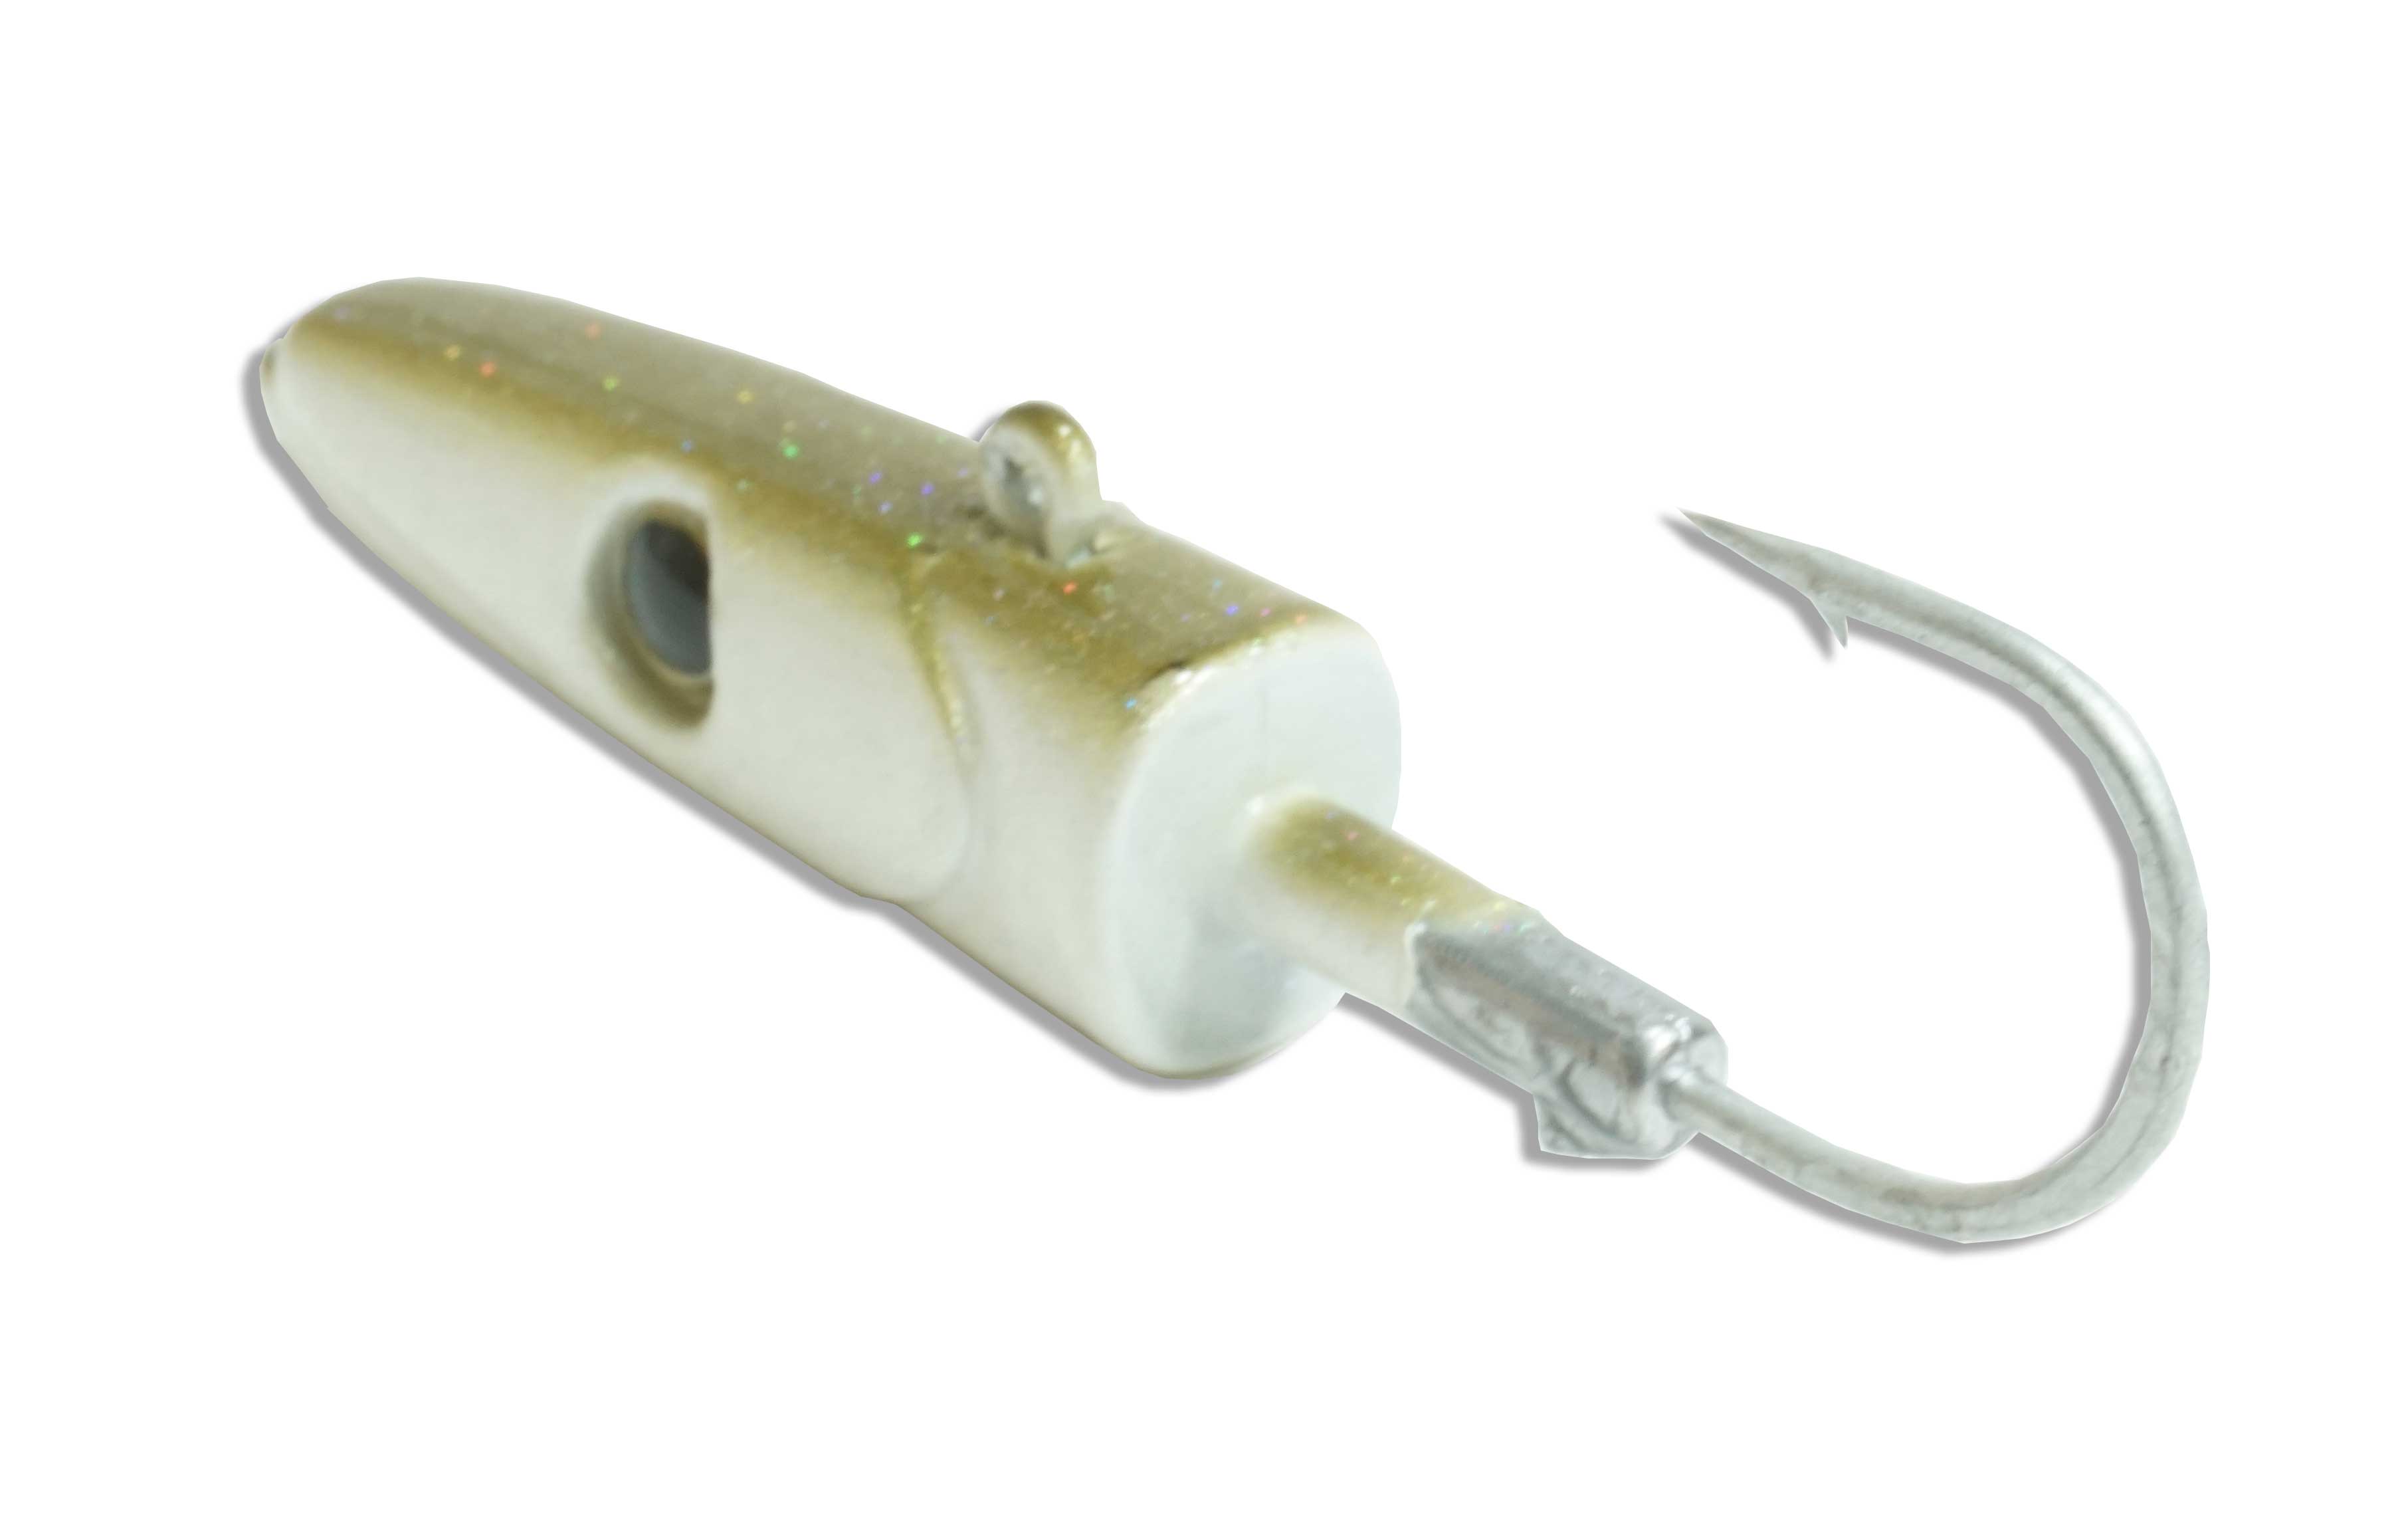 Almost Alive Sand Eel Lead Jig Head Lure Hook 45 Gram 1.6 Oz - Click Image to Close